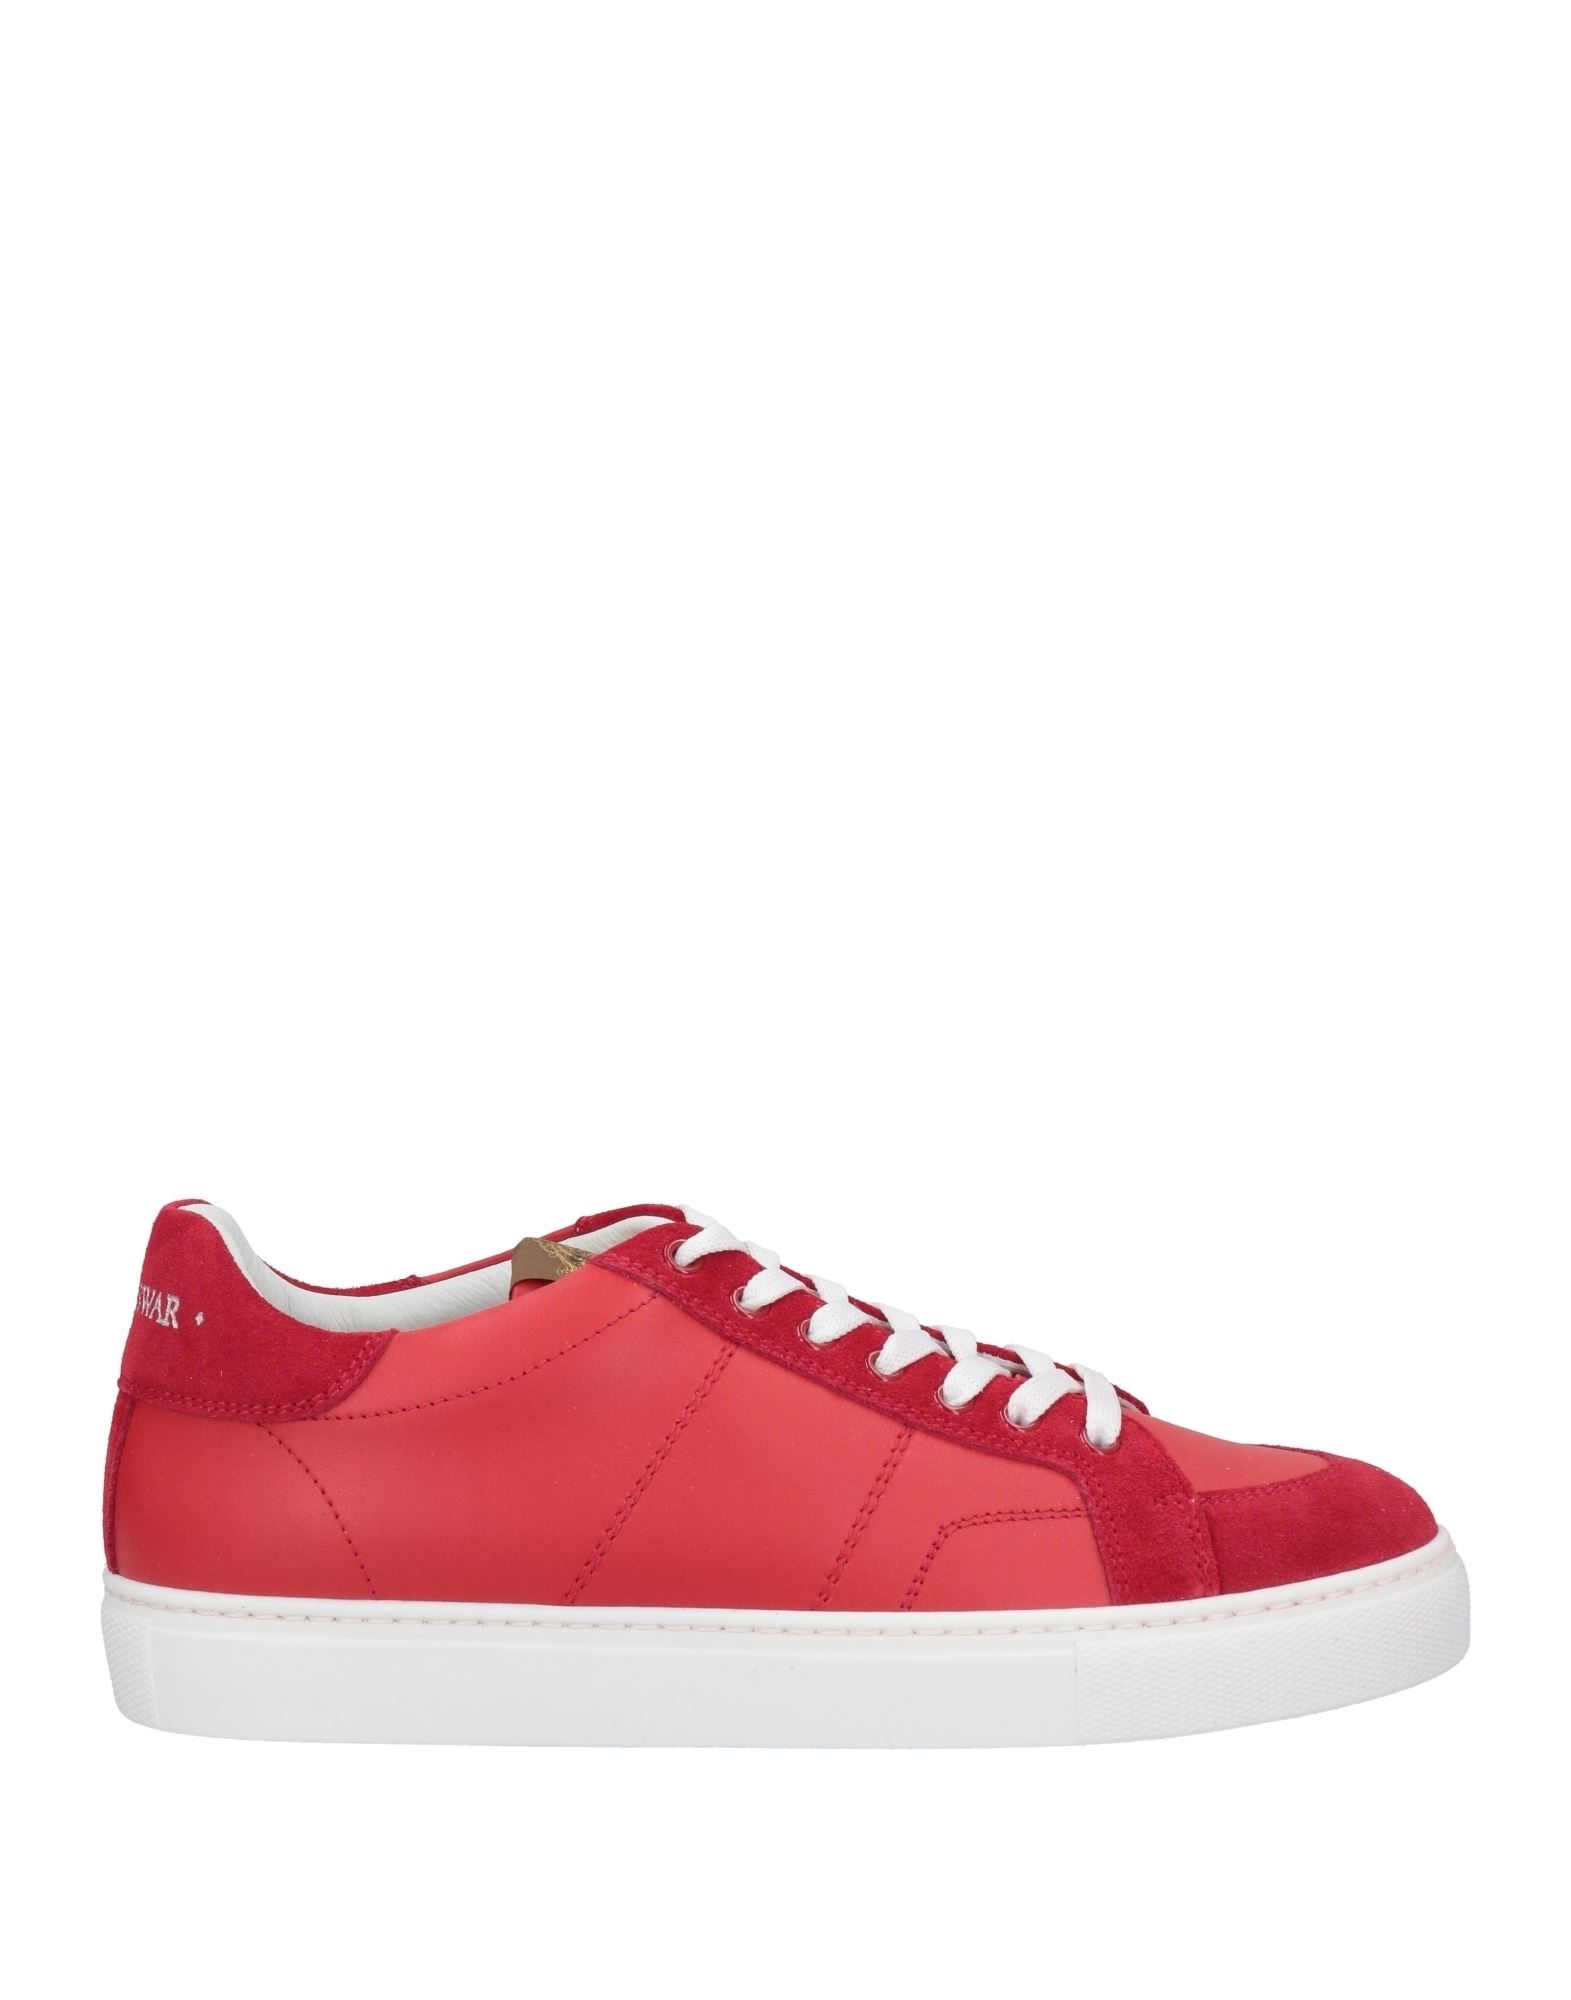 Studs War Sneakers In Red